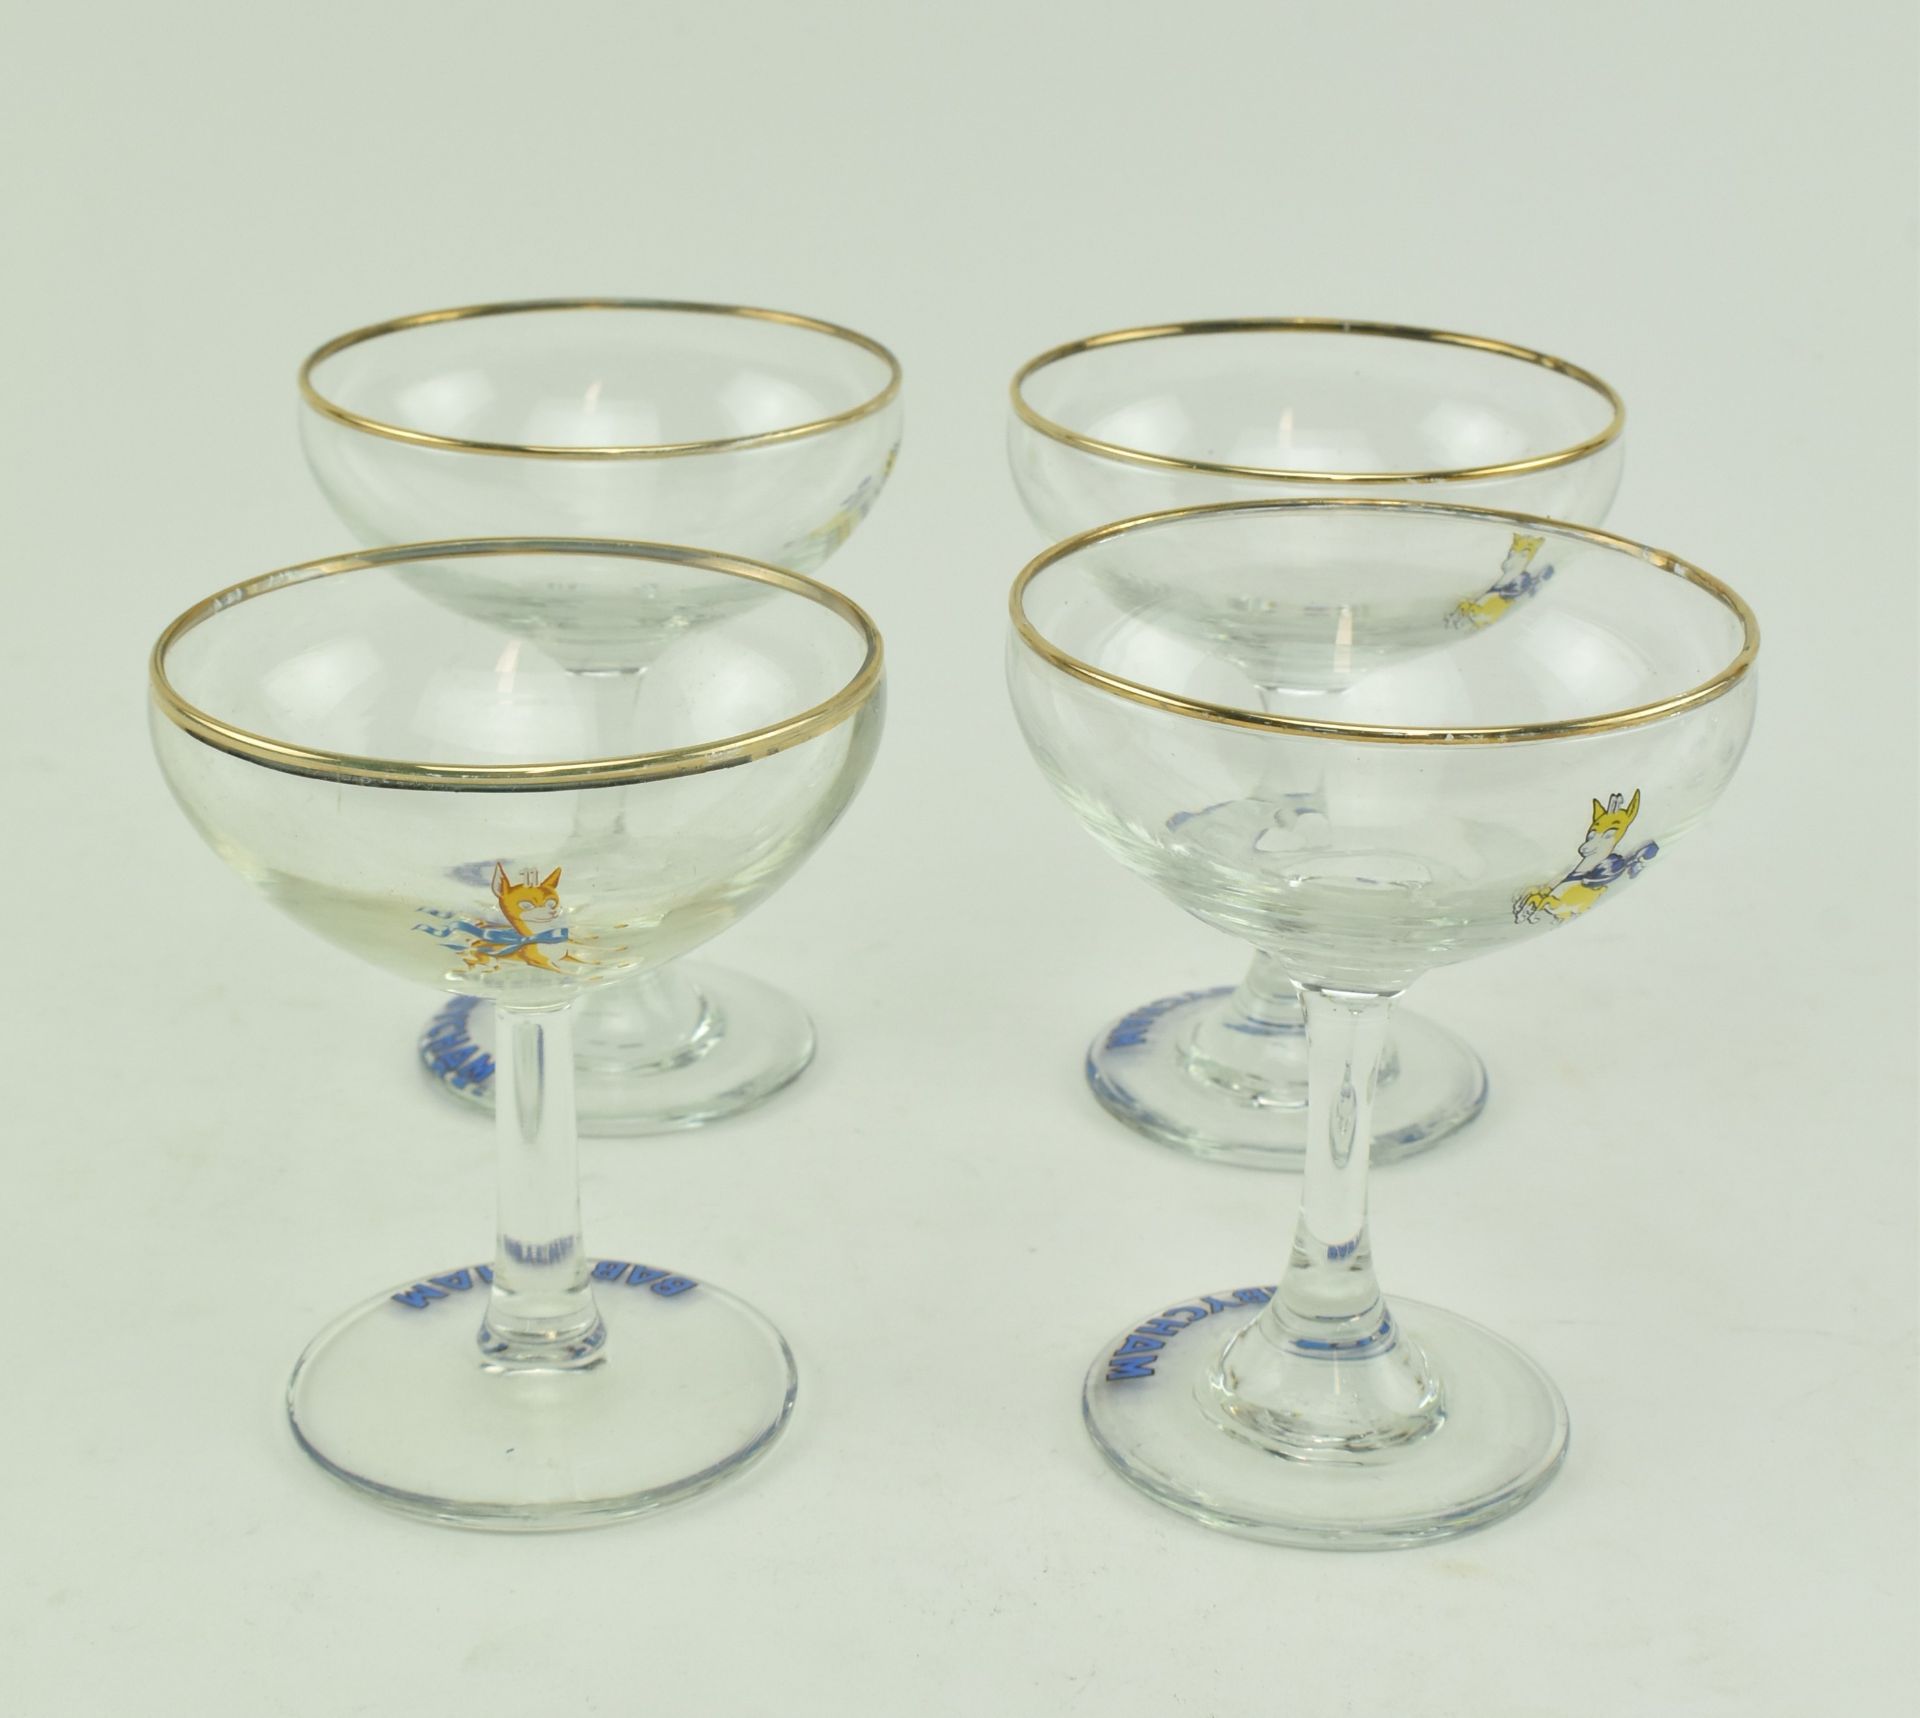 BABYCHAM - COLLECTION OF NINE VINTAGE CHAMPAGNE COUPES - Image 4 of 11